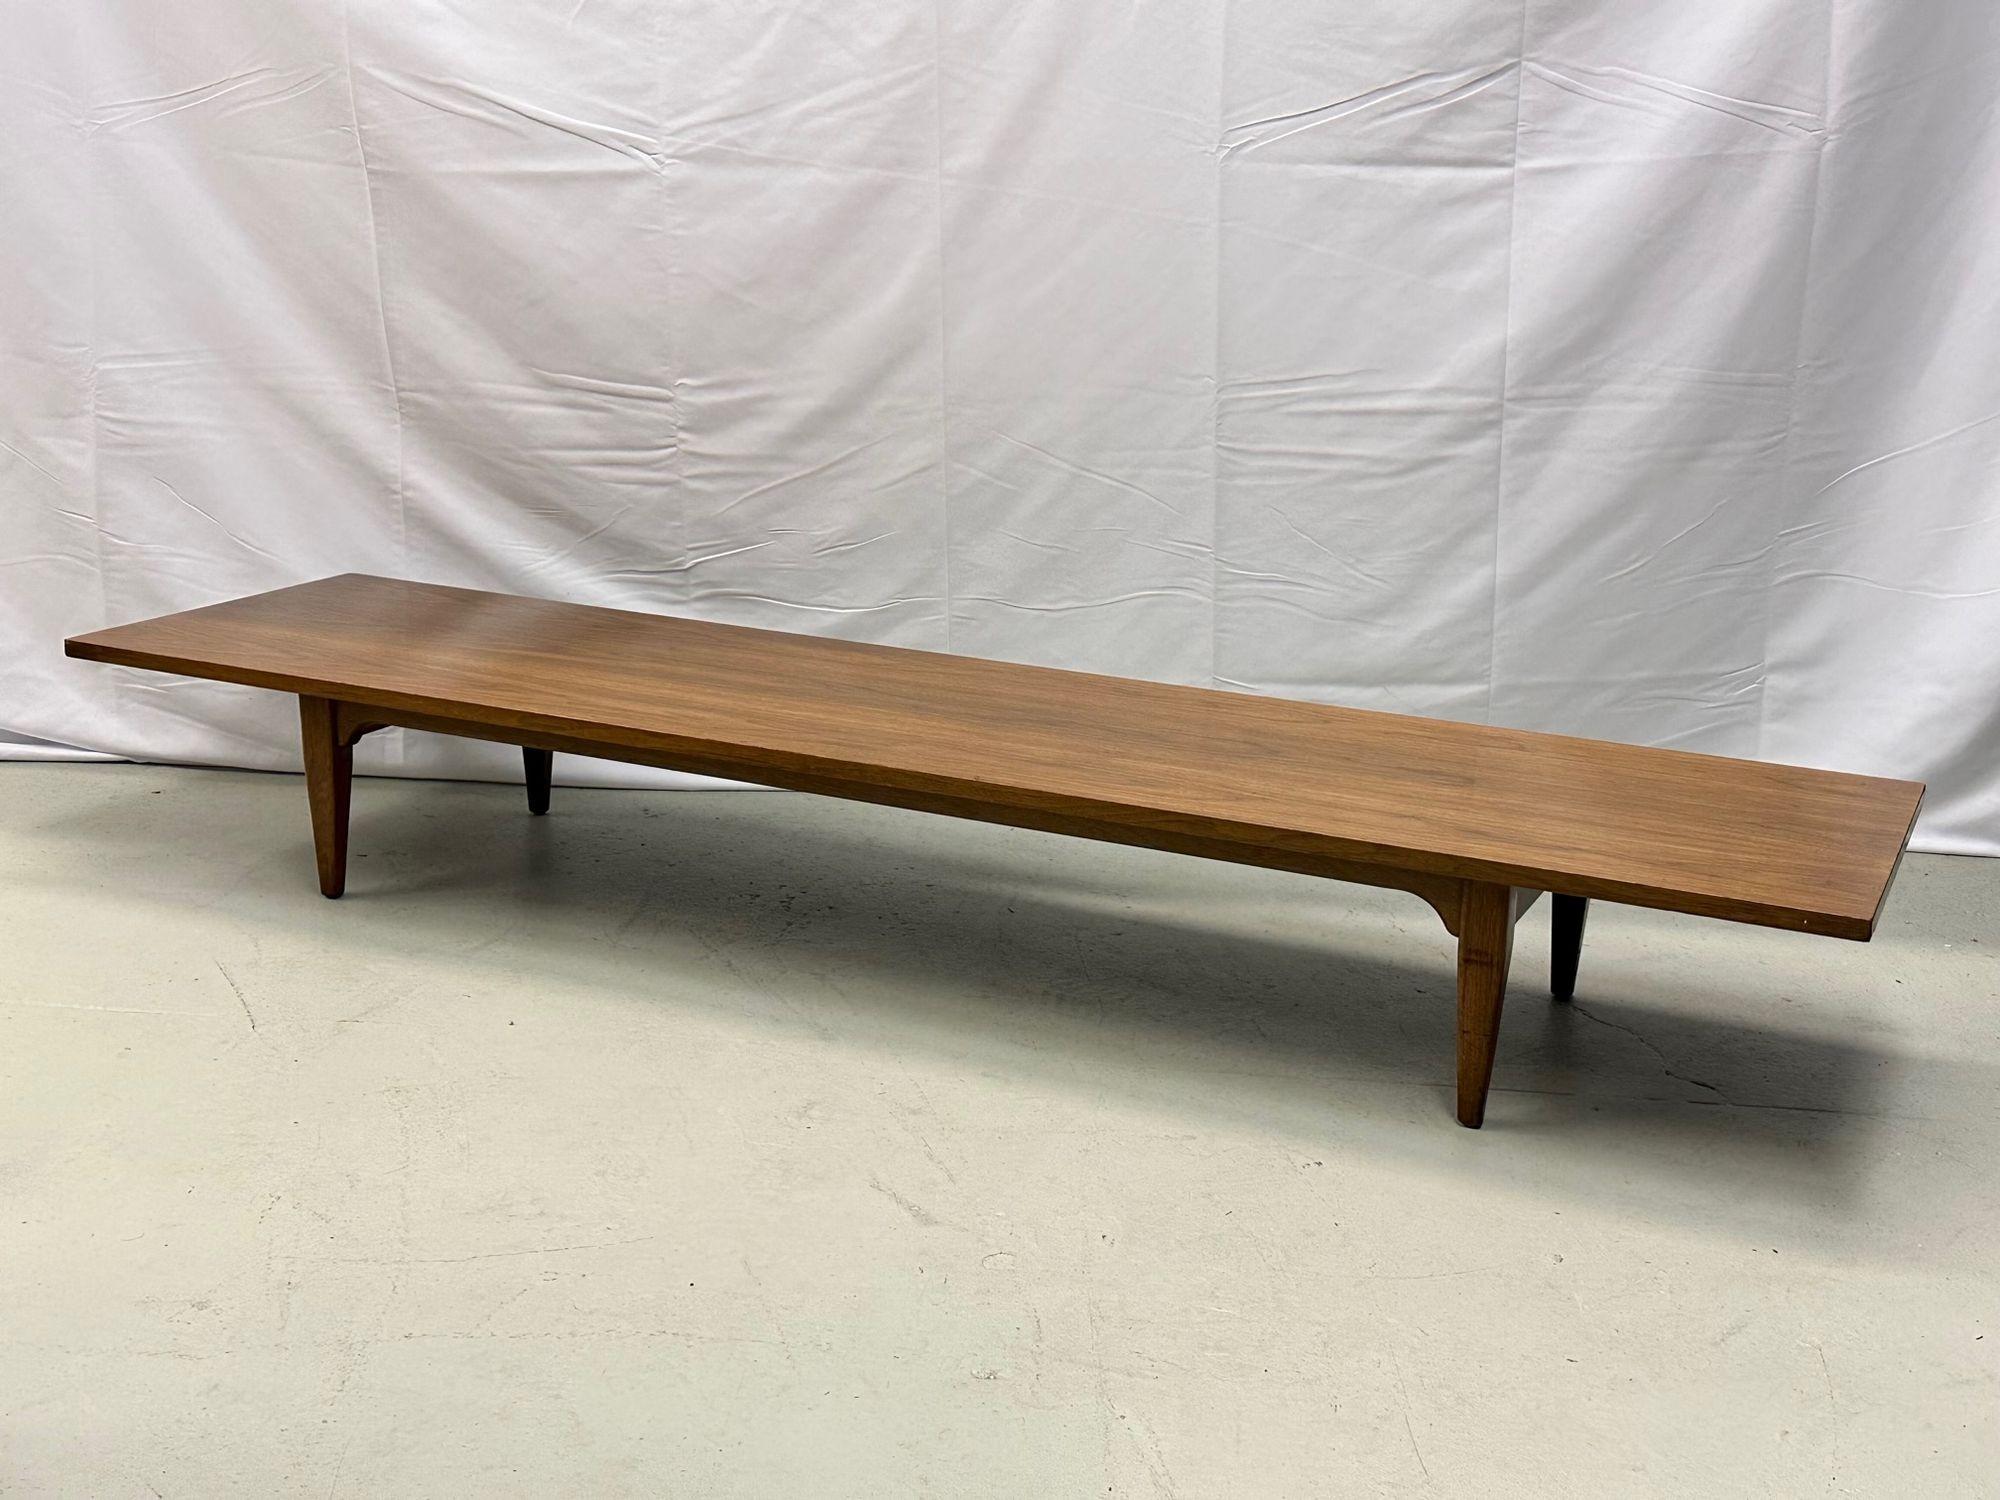 Danish Mid-Century Modern Cocktail or Coffee Table, 1950s, Solid Teak For Sale 3